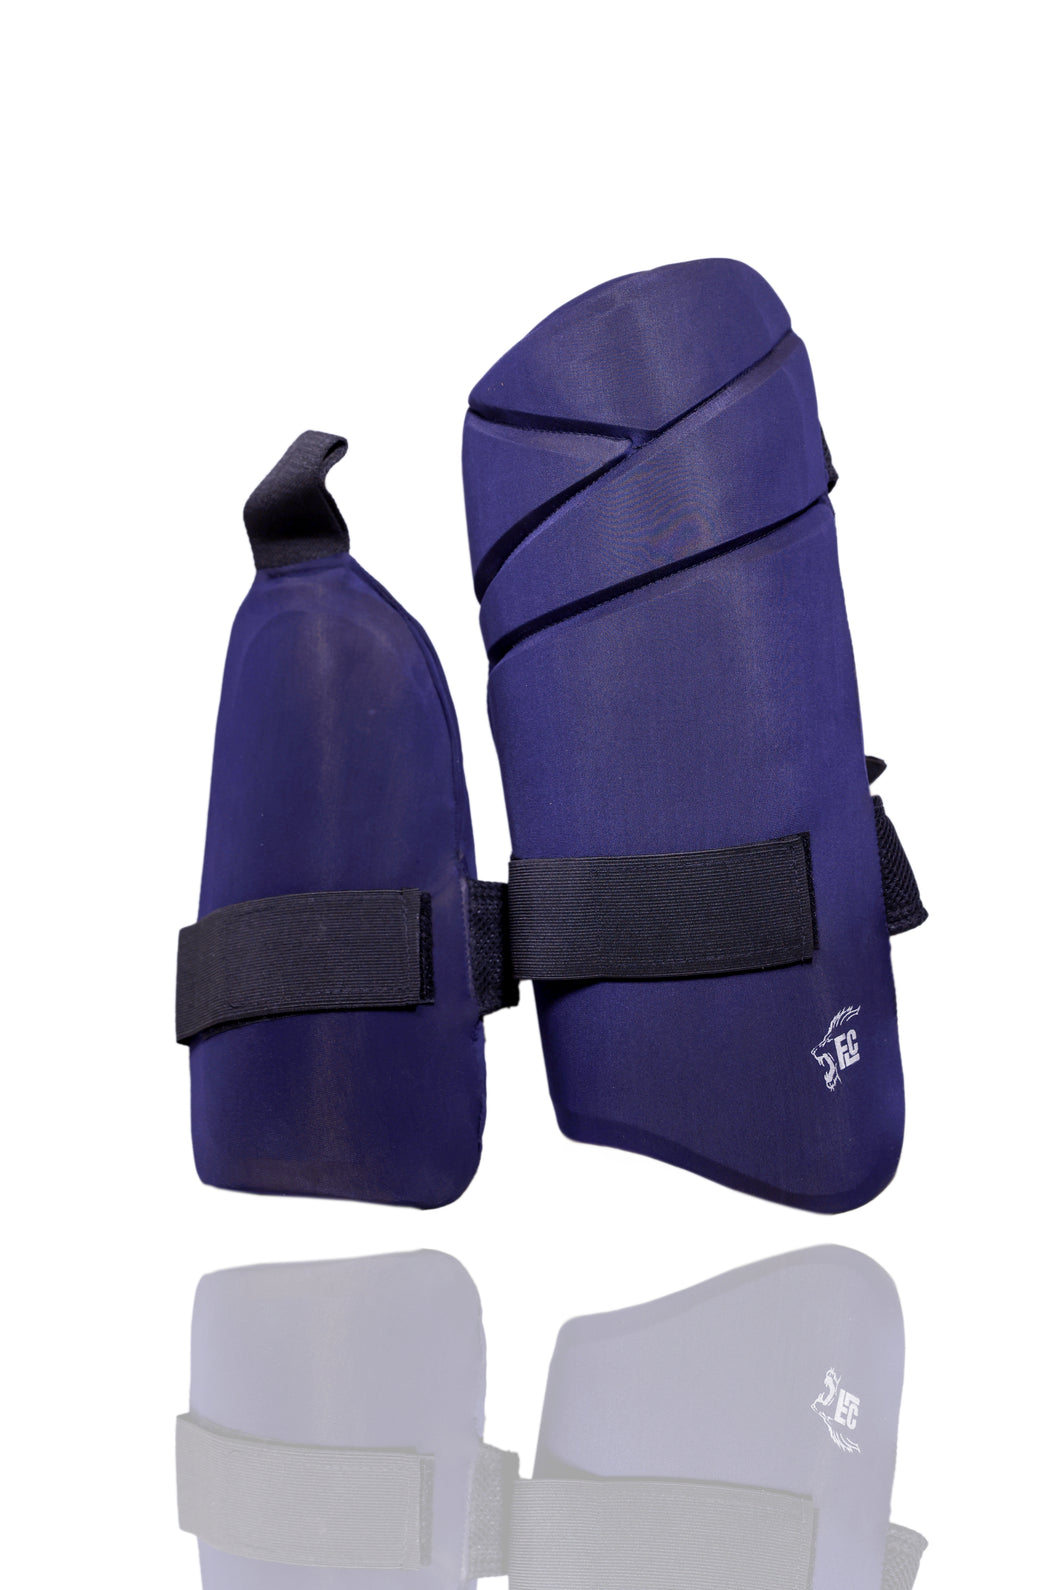 Navy - Limited Edition Dual Thigh Guard